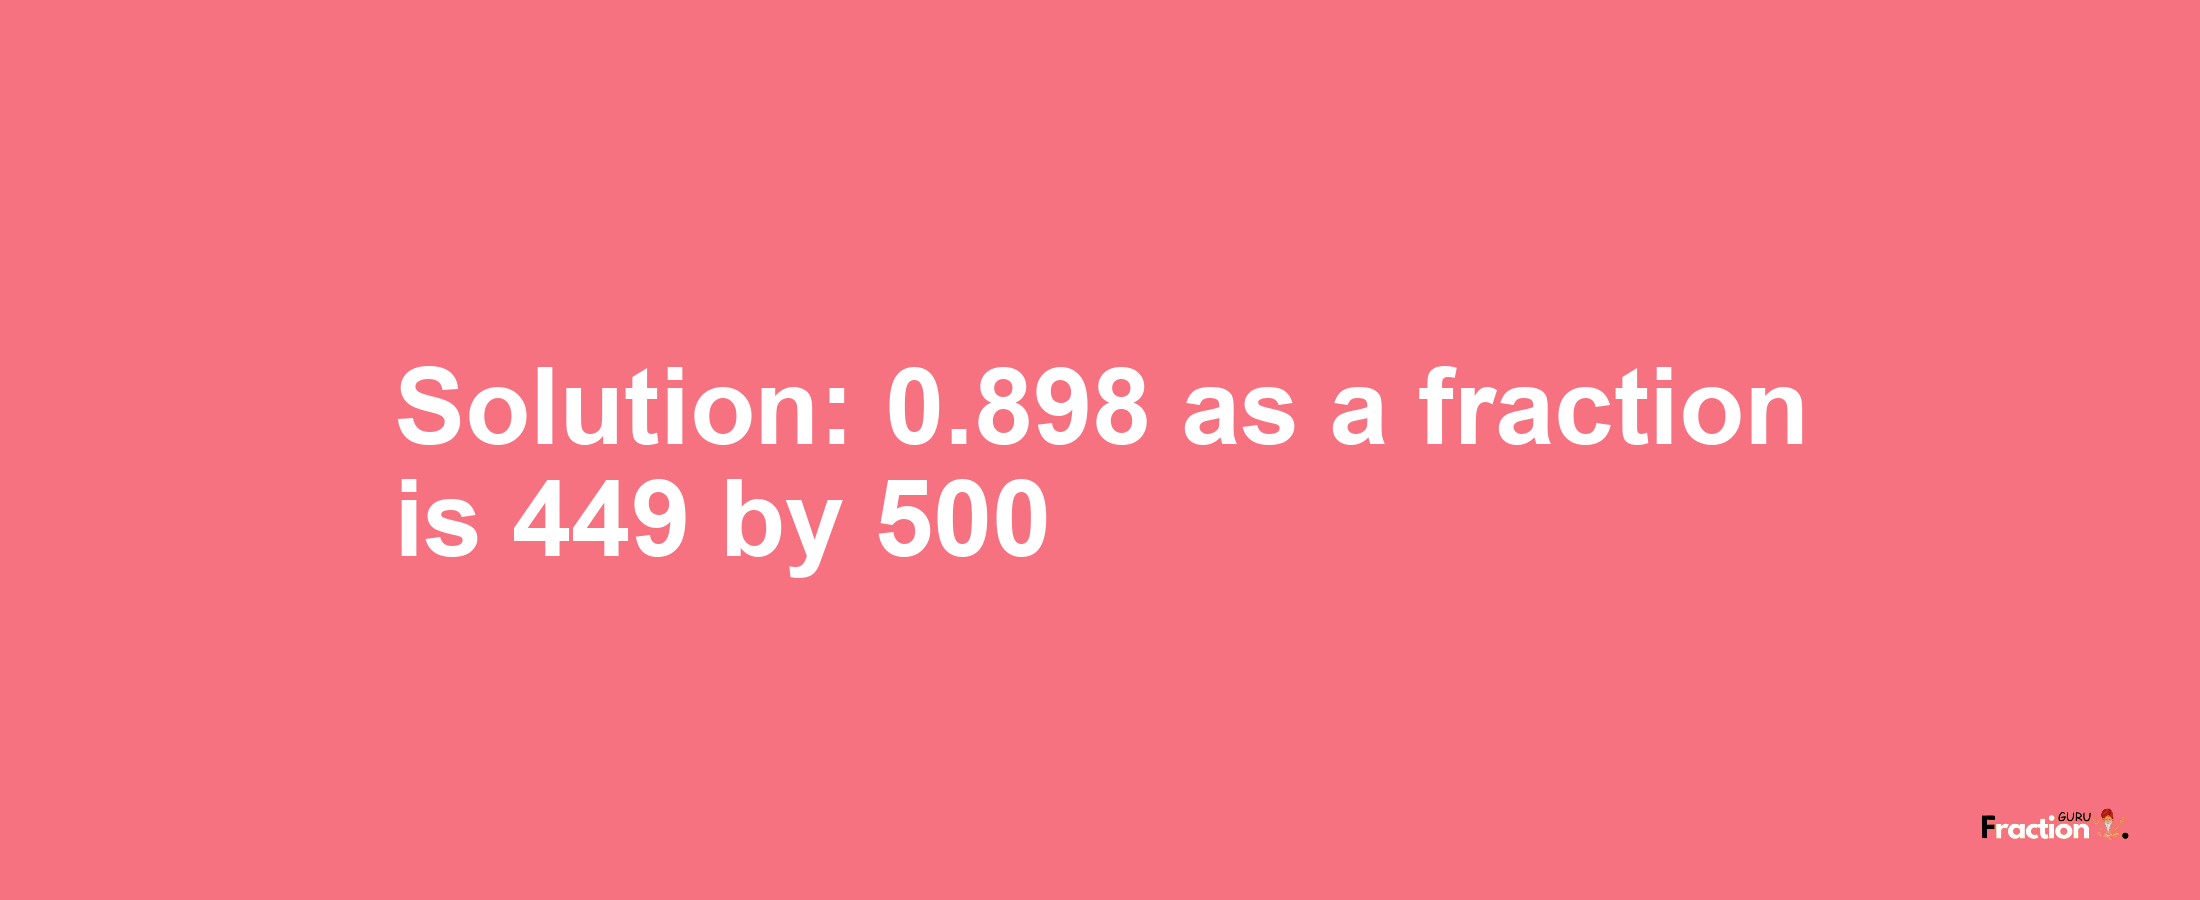 Solution:0.898 as a fraction is 449/500